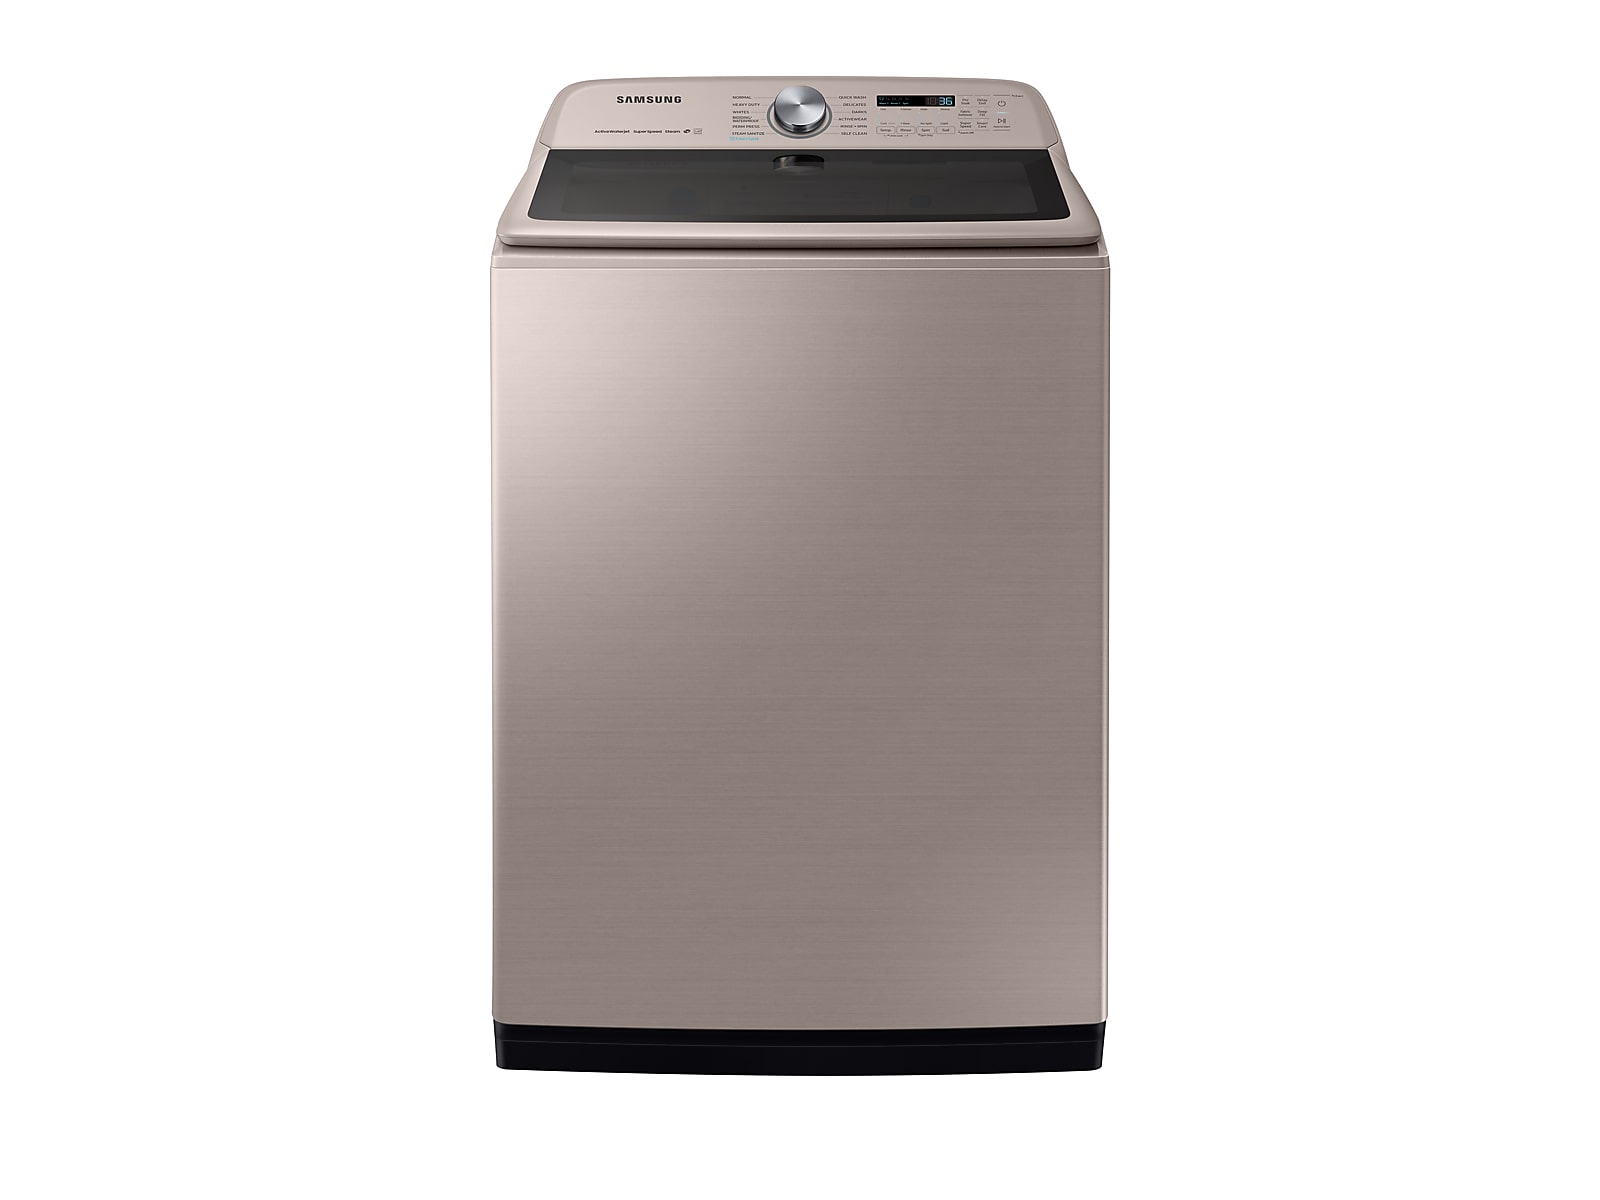 Samsung 5.4 cu. ft. Top Load Washer with Super Speed in Champagne(WA54R7600AC/US)